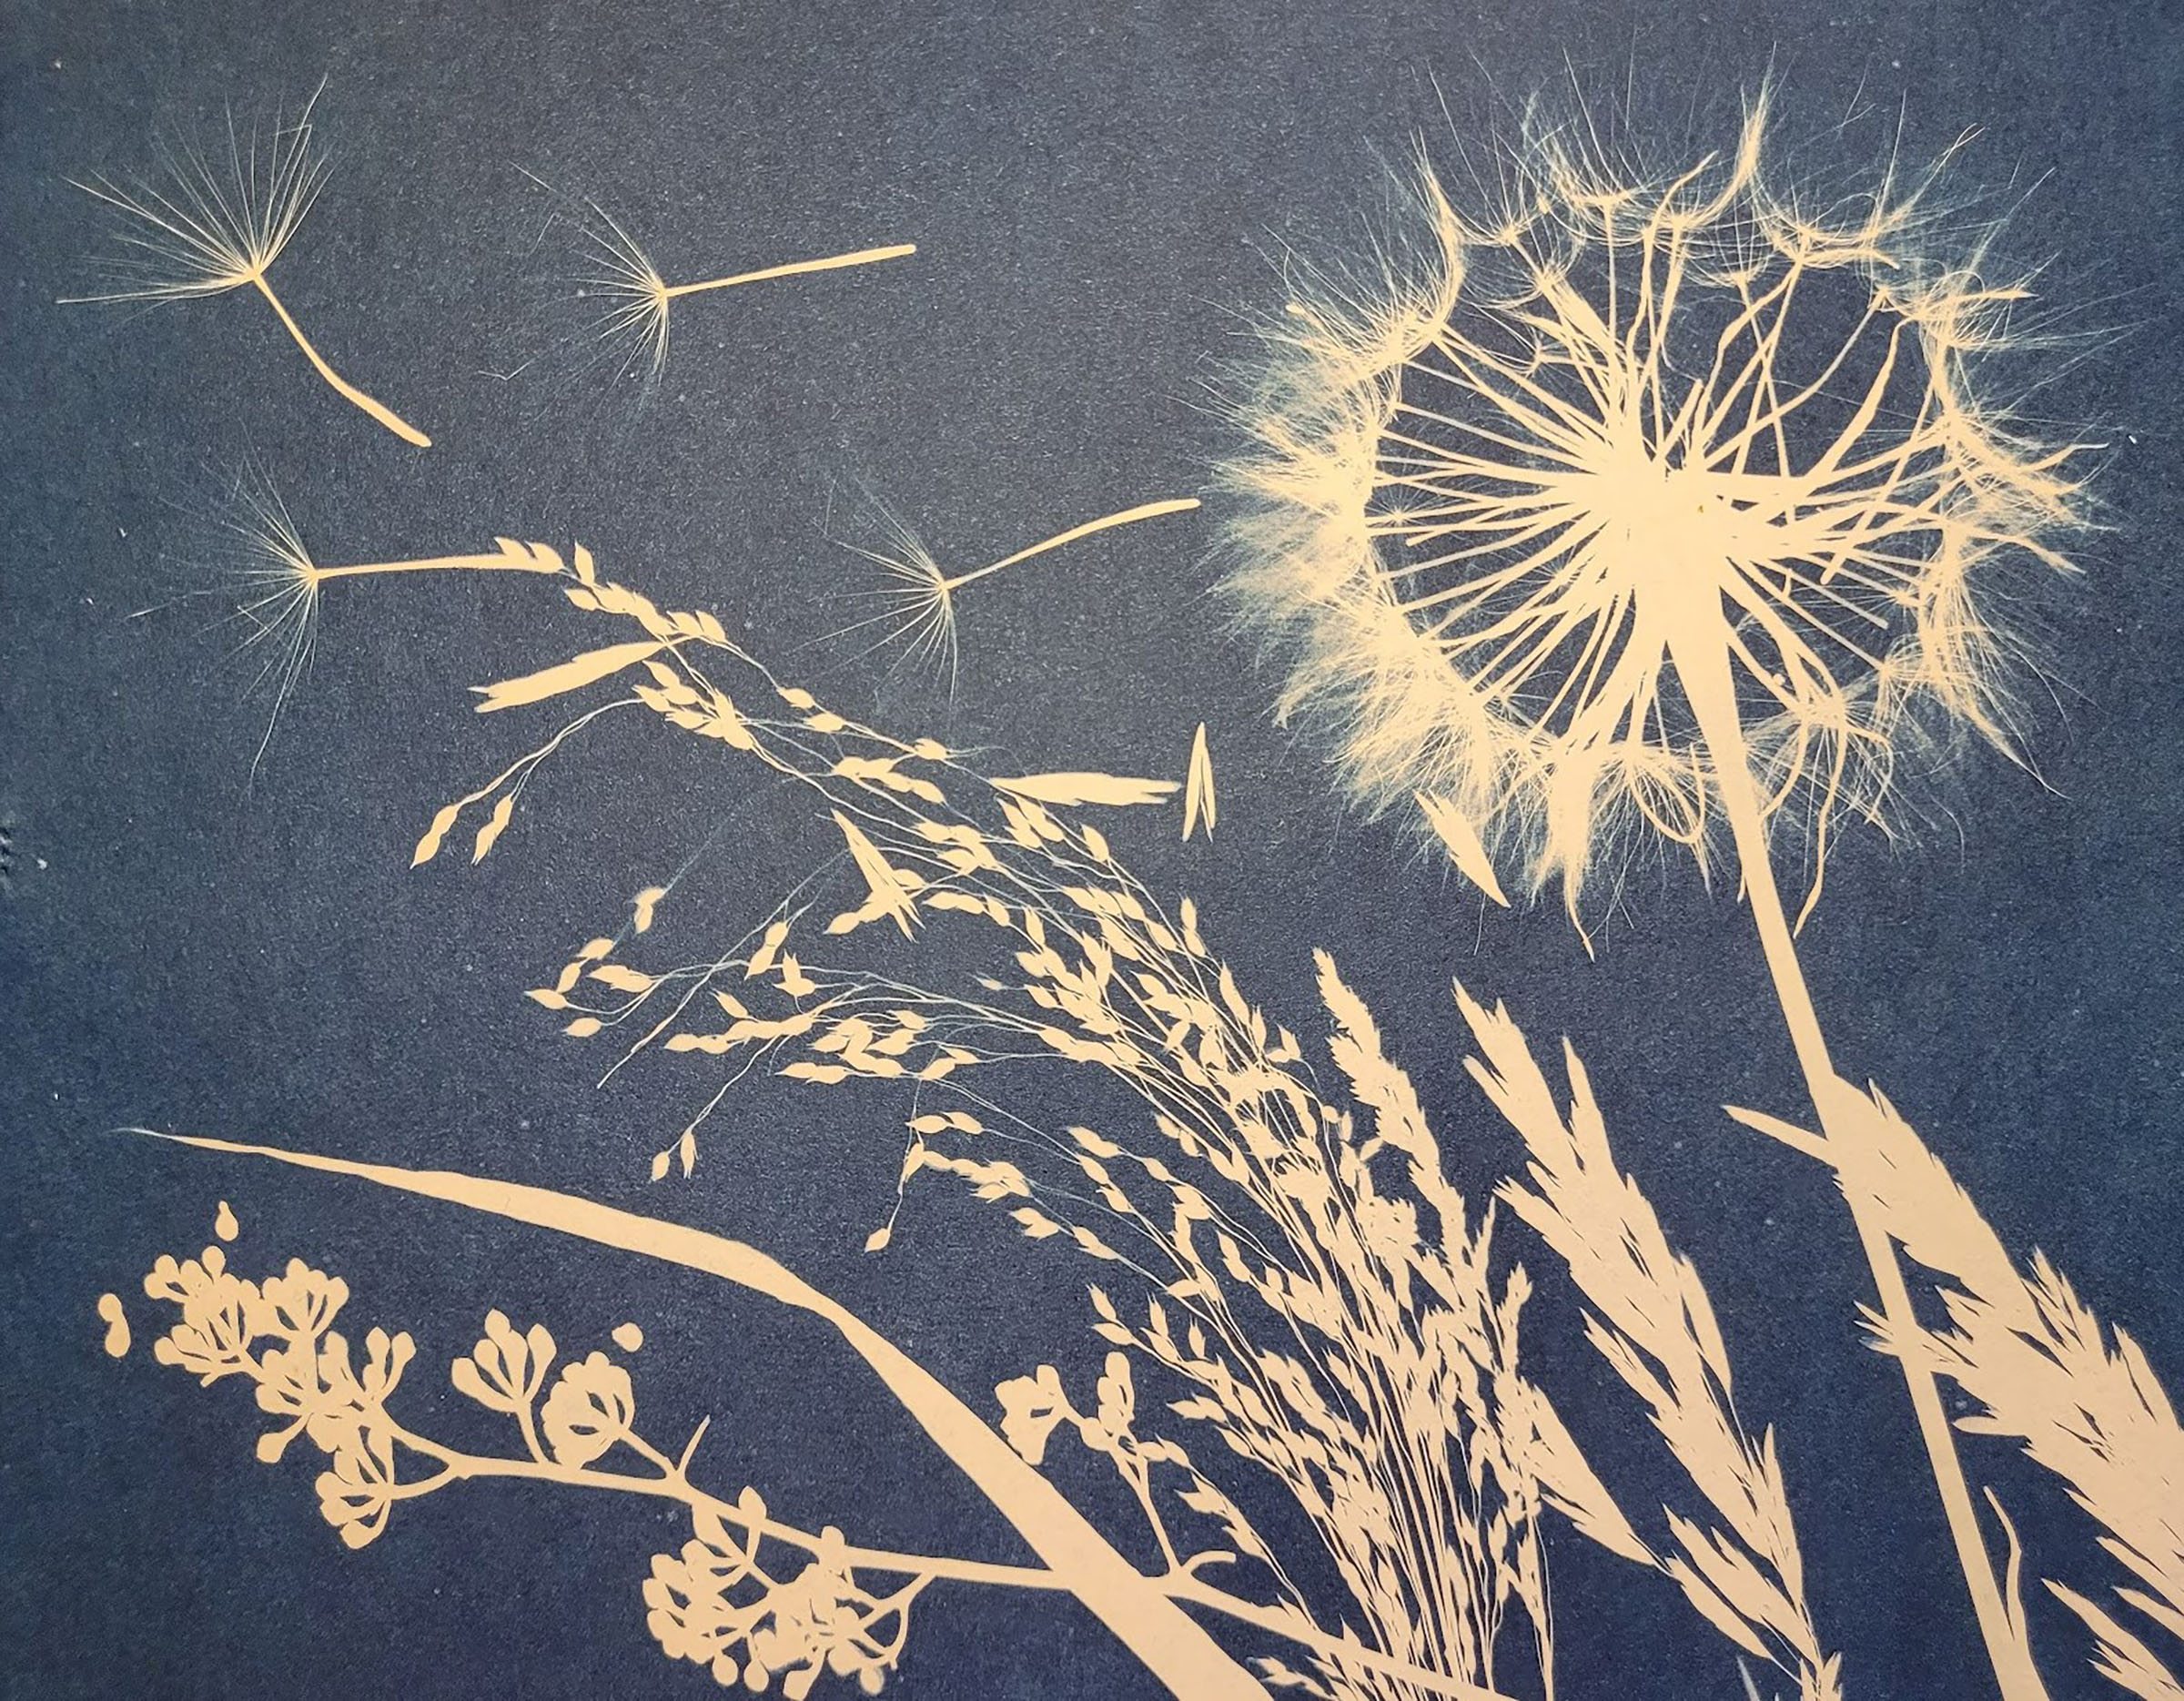 cyanotype in blue and off-white of grasses, other plants, and dandelion with seeds floating